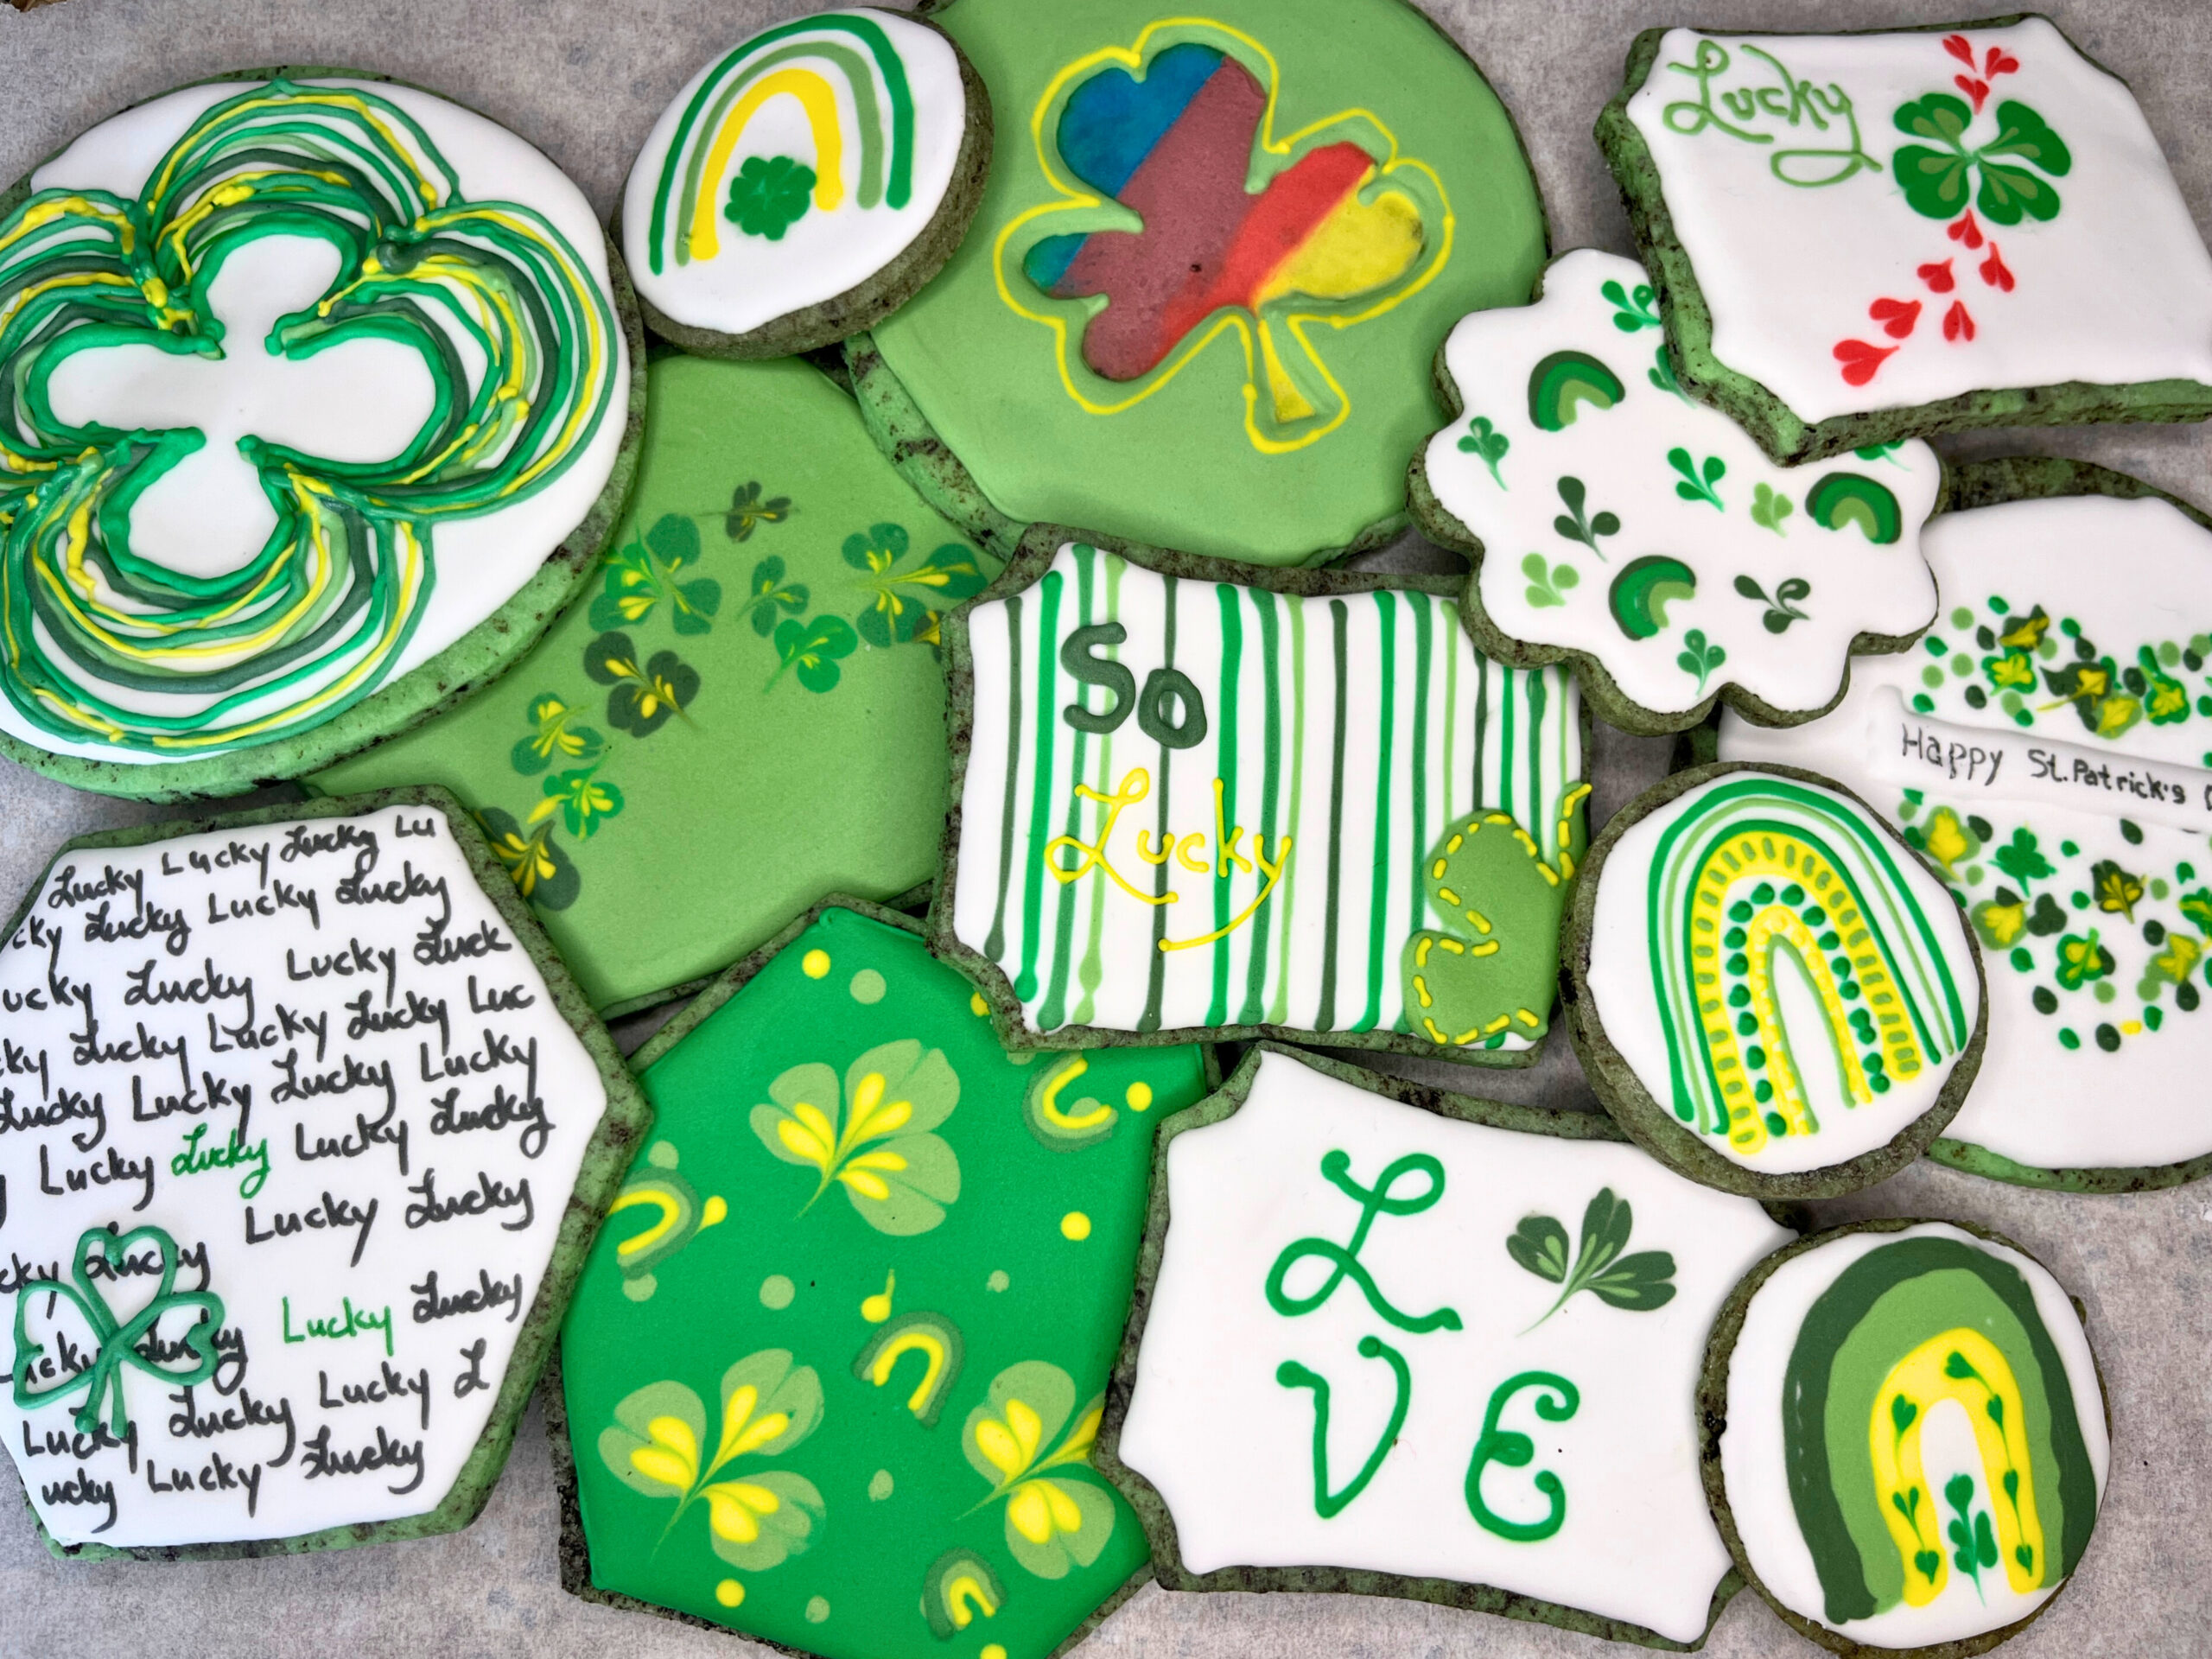 A group of St. Patrick's Day decorated sugar cookies.